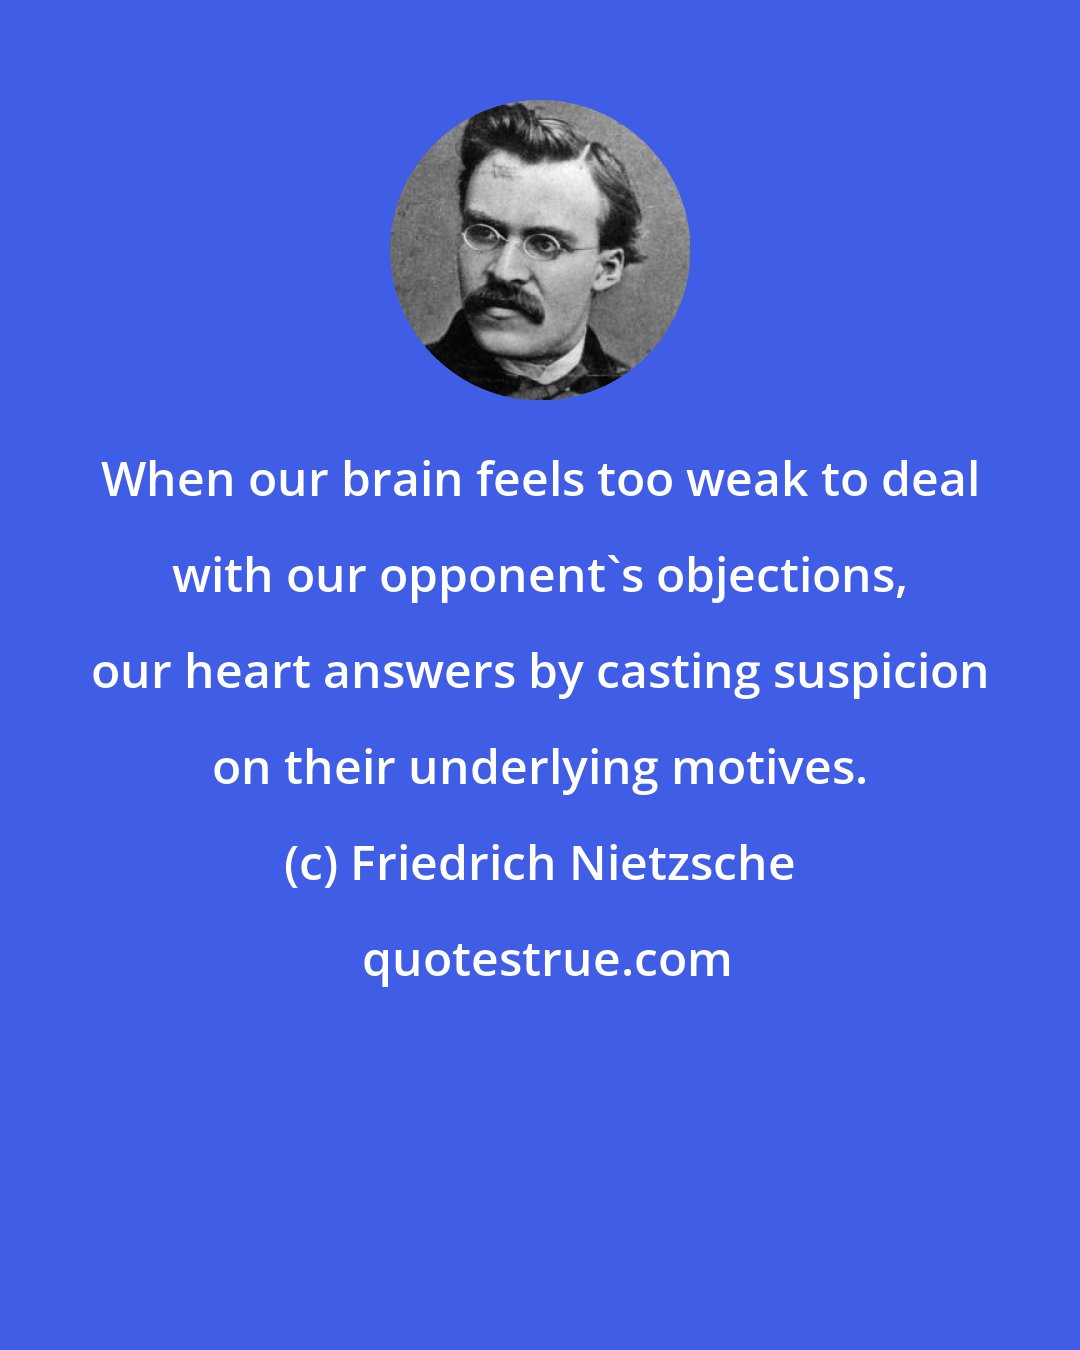 Friedrich Nietzsche: When our brain feels too weak to deal with our opponent's objections, our heart answers by casting suspicion on their underlying motives.